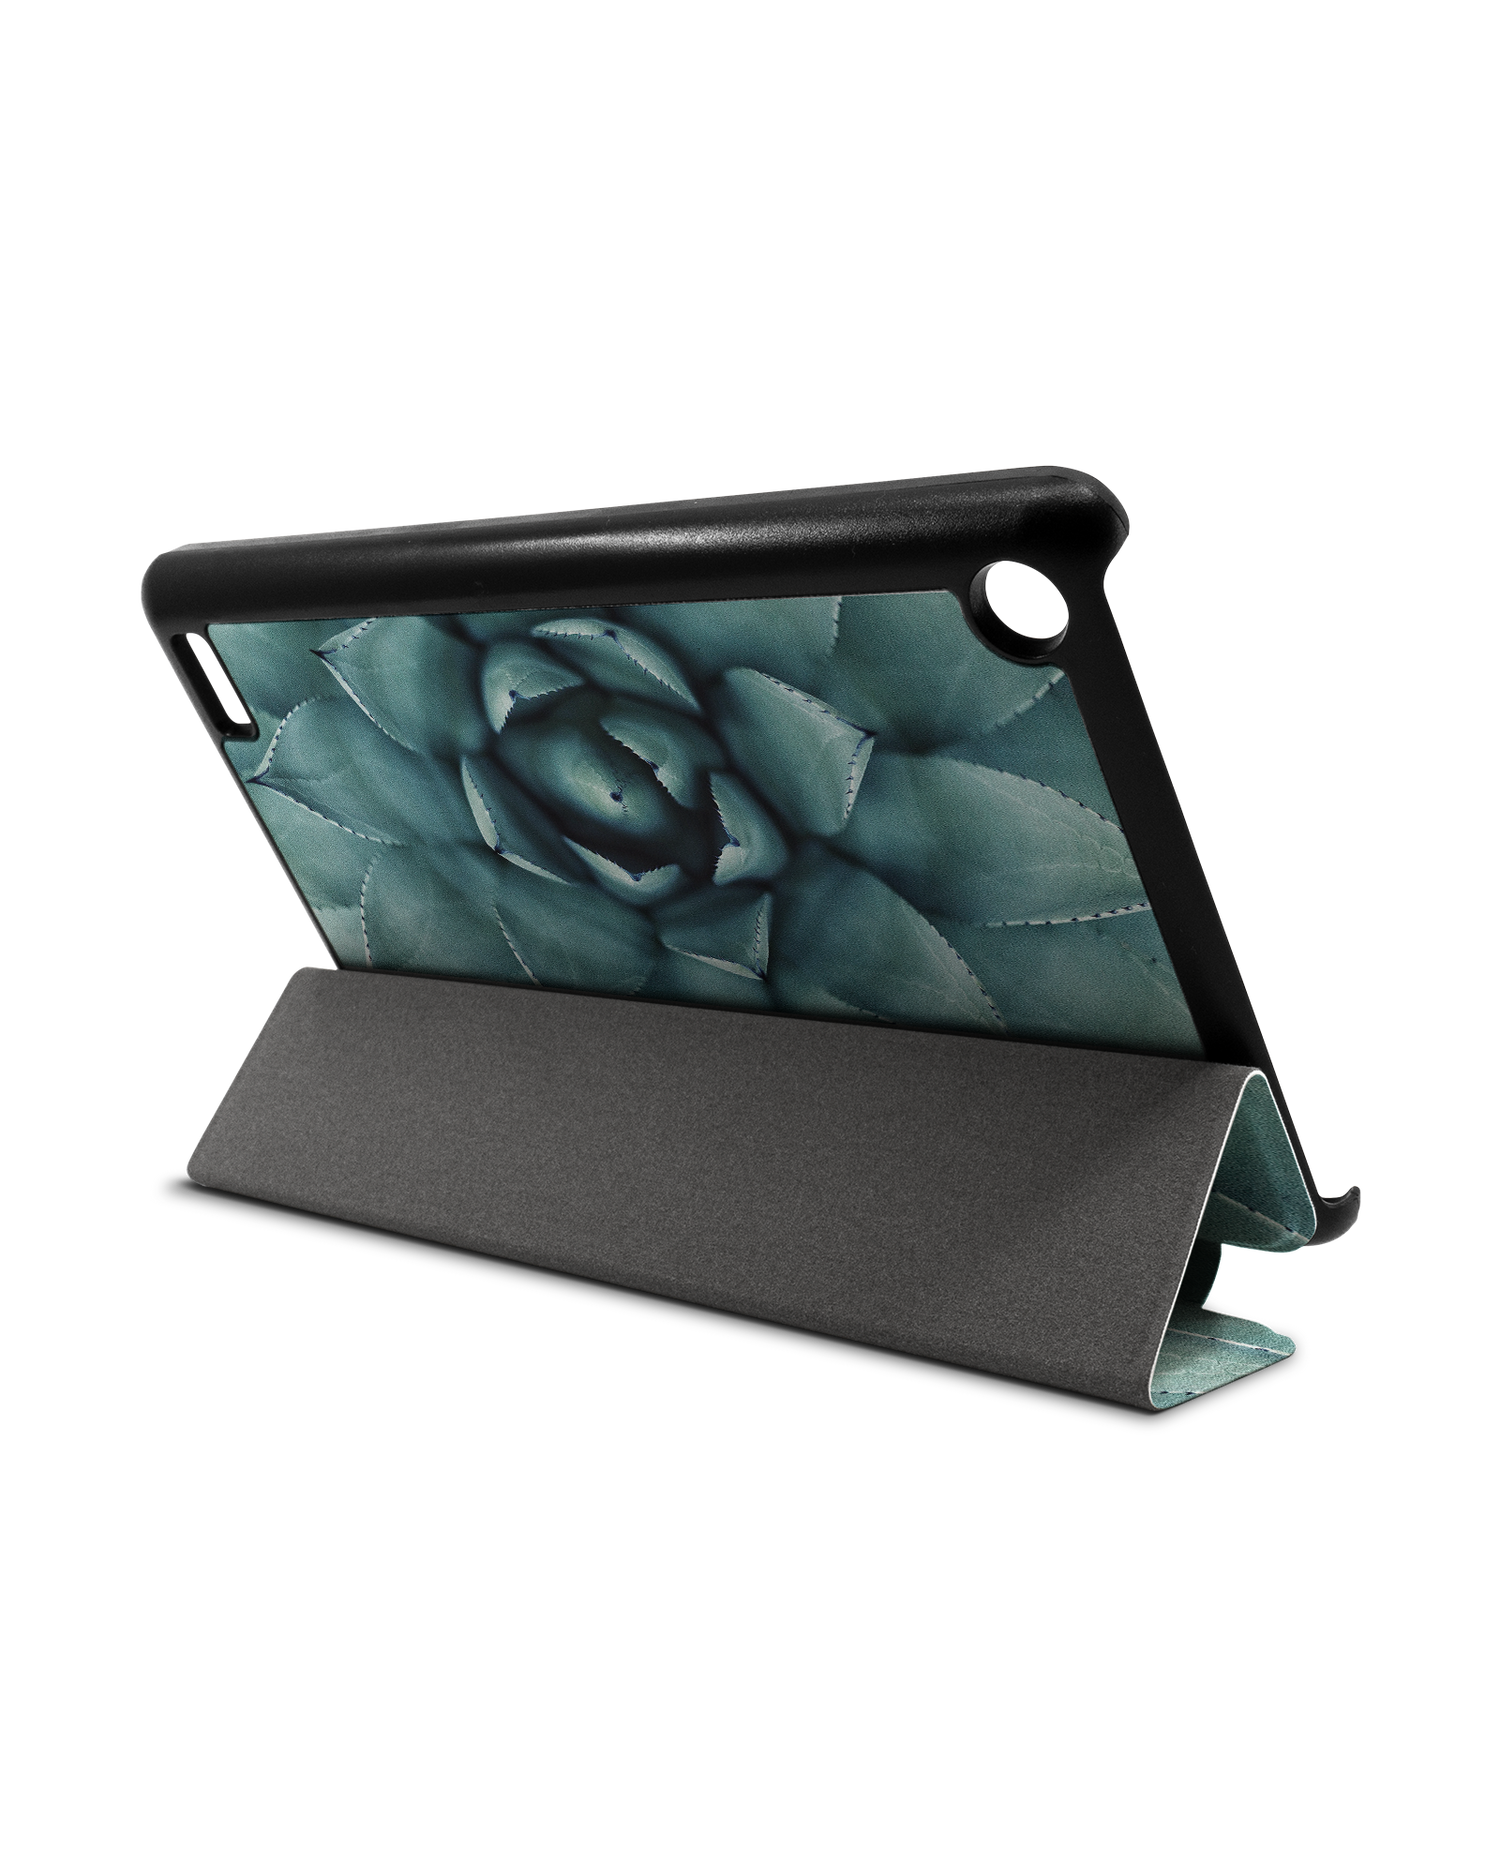 Beautiful Succulent Tablet Smart Case for Amazon Fire 7: Used as Stand